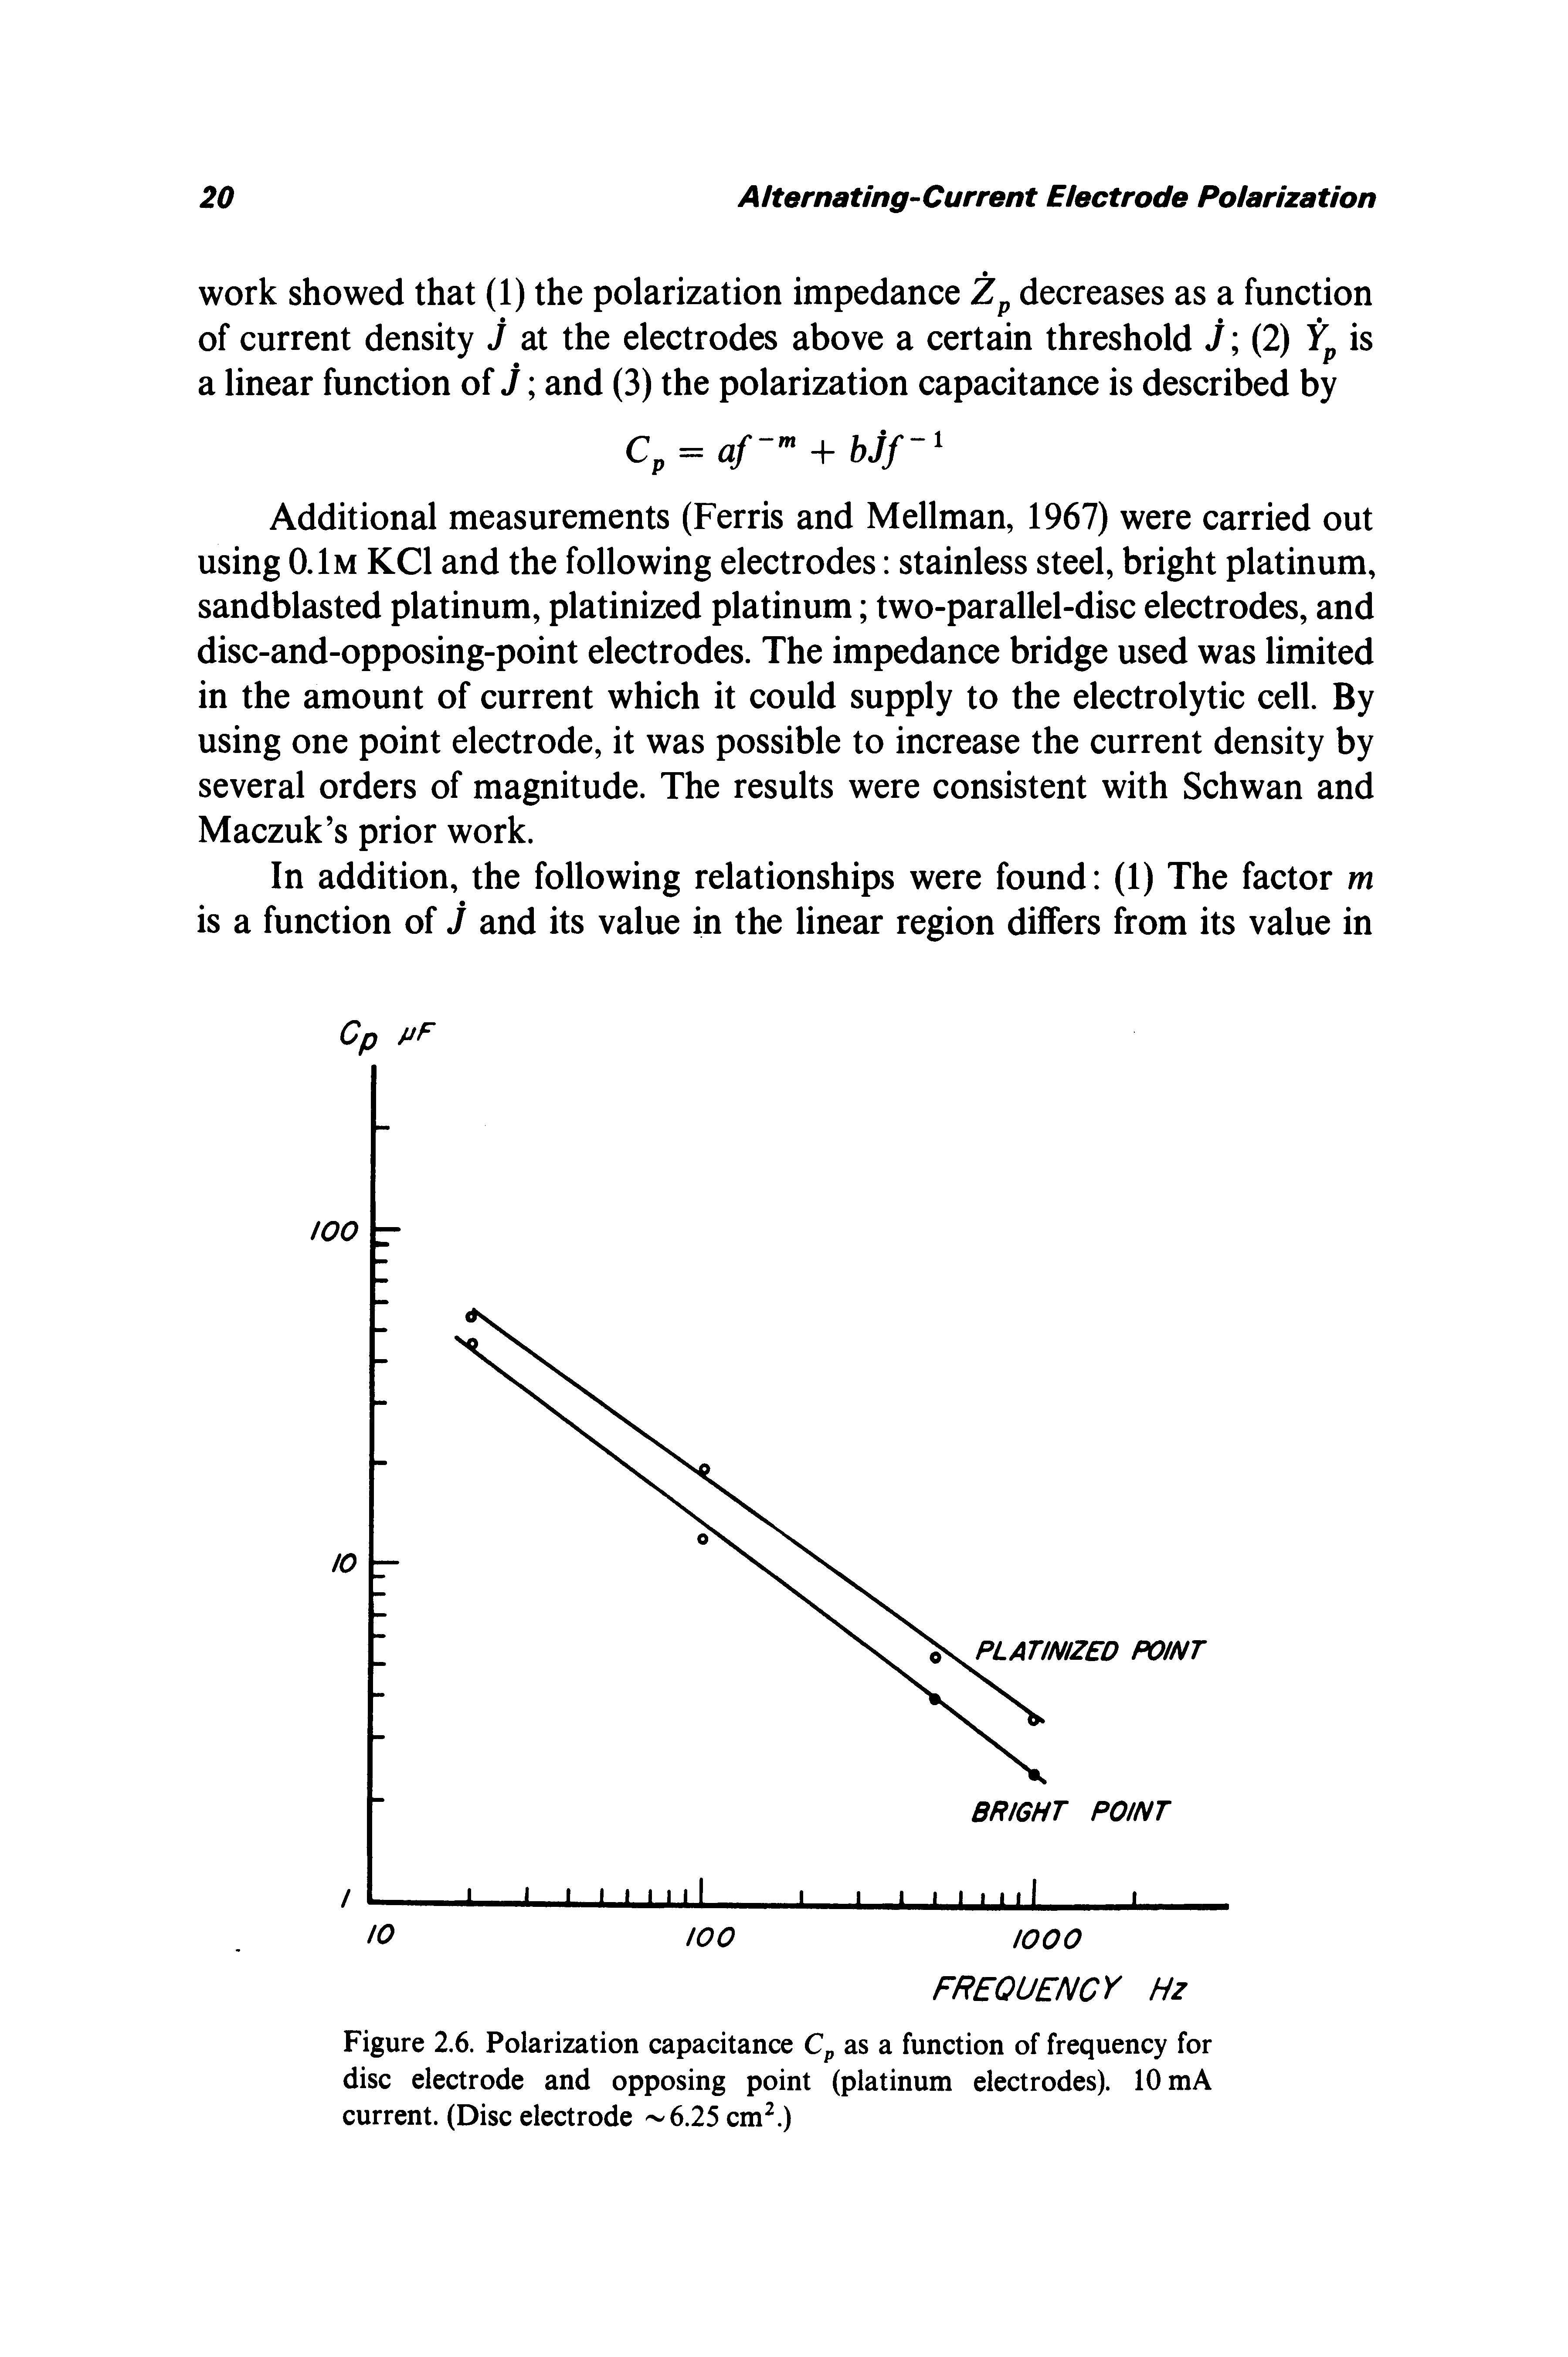 Figure 2.6. Polarization capacitance Cp as a function of frequency for disc electrode and opposing point (platinum electrodes). 10 mA current. (Disc electrode 6.25 cm. )...